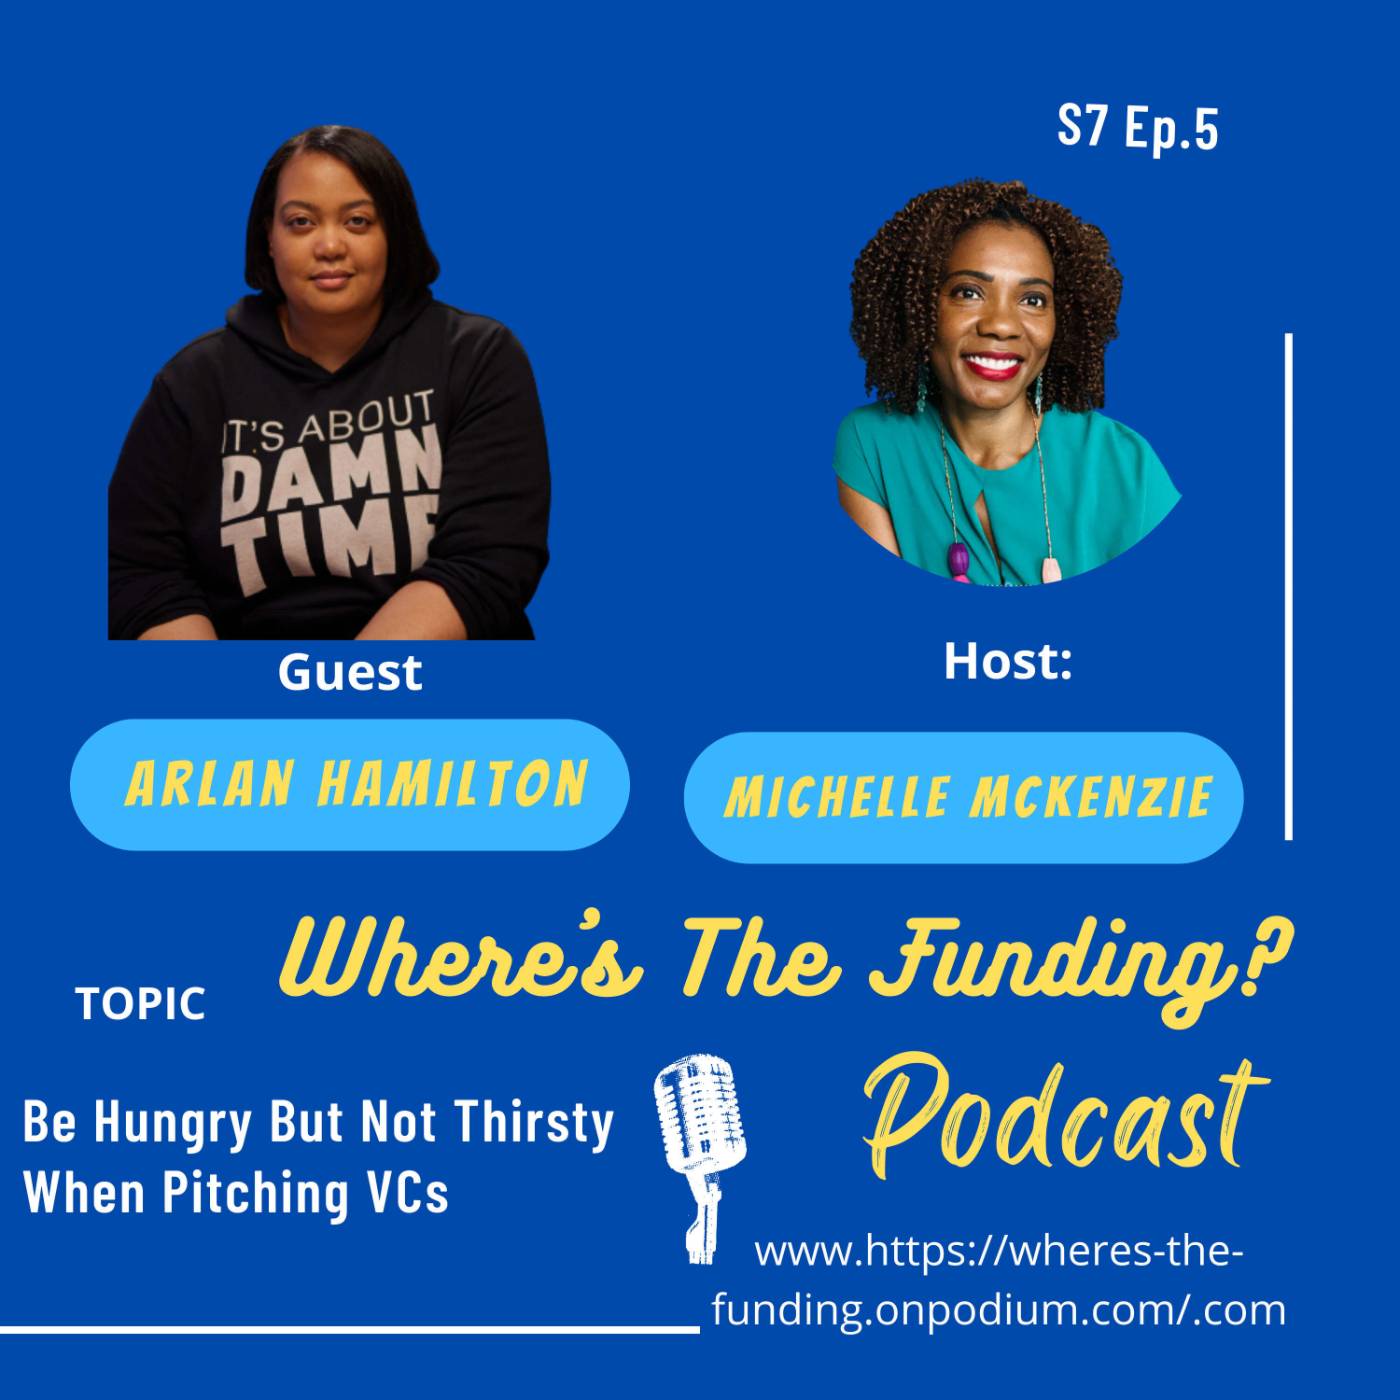 Be Hungry But Not Thirsty When Pitching VCs with Arlan Hamilton S7 Ep. 5